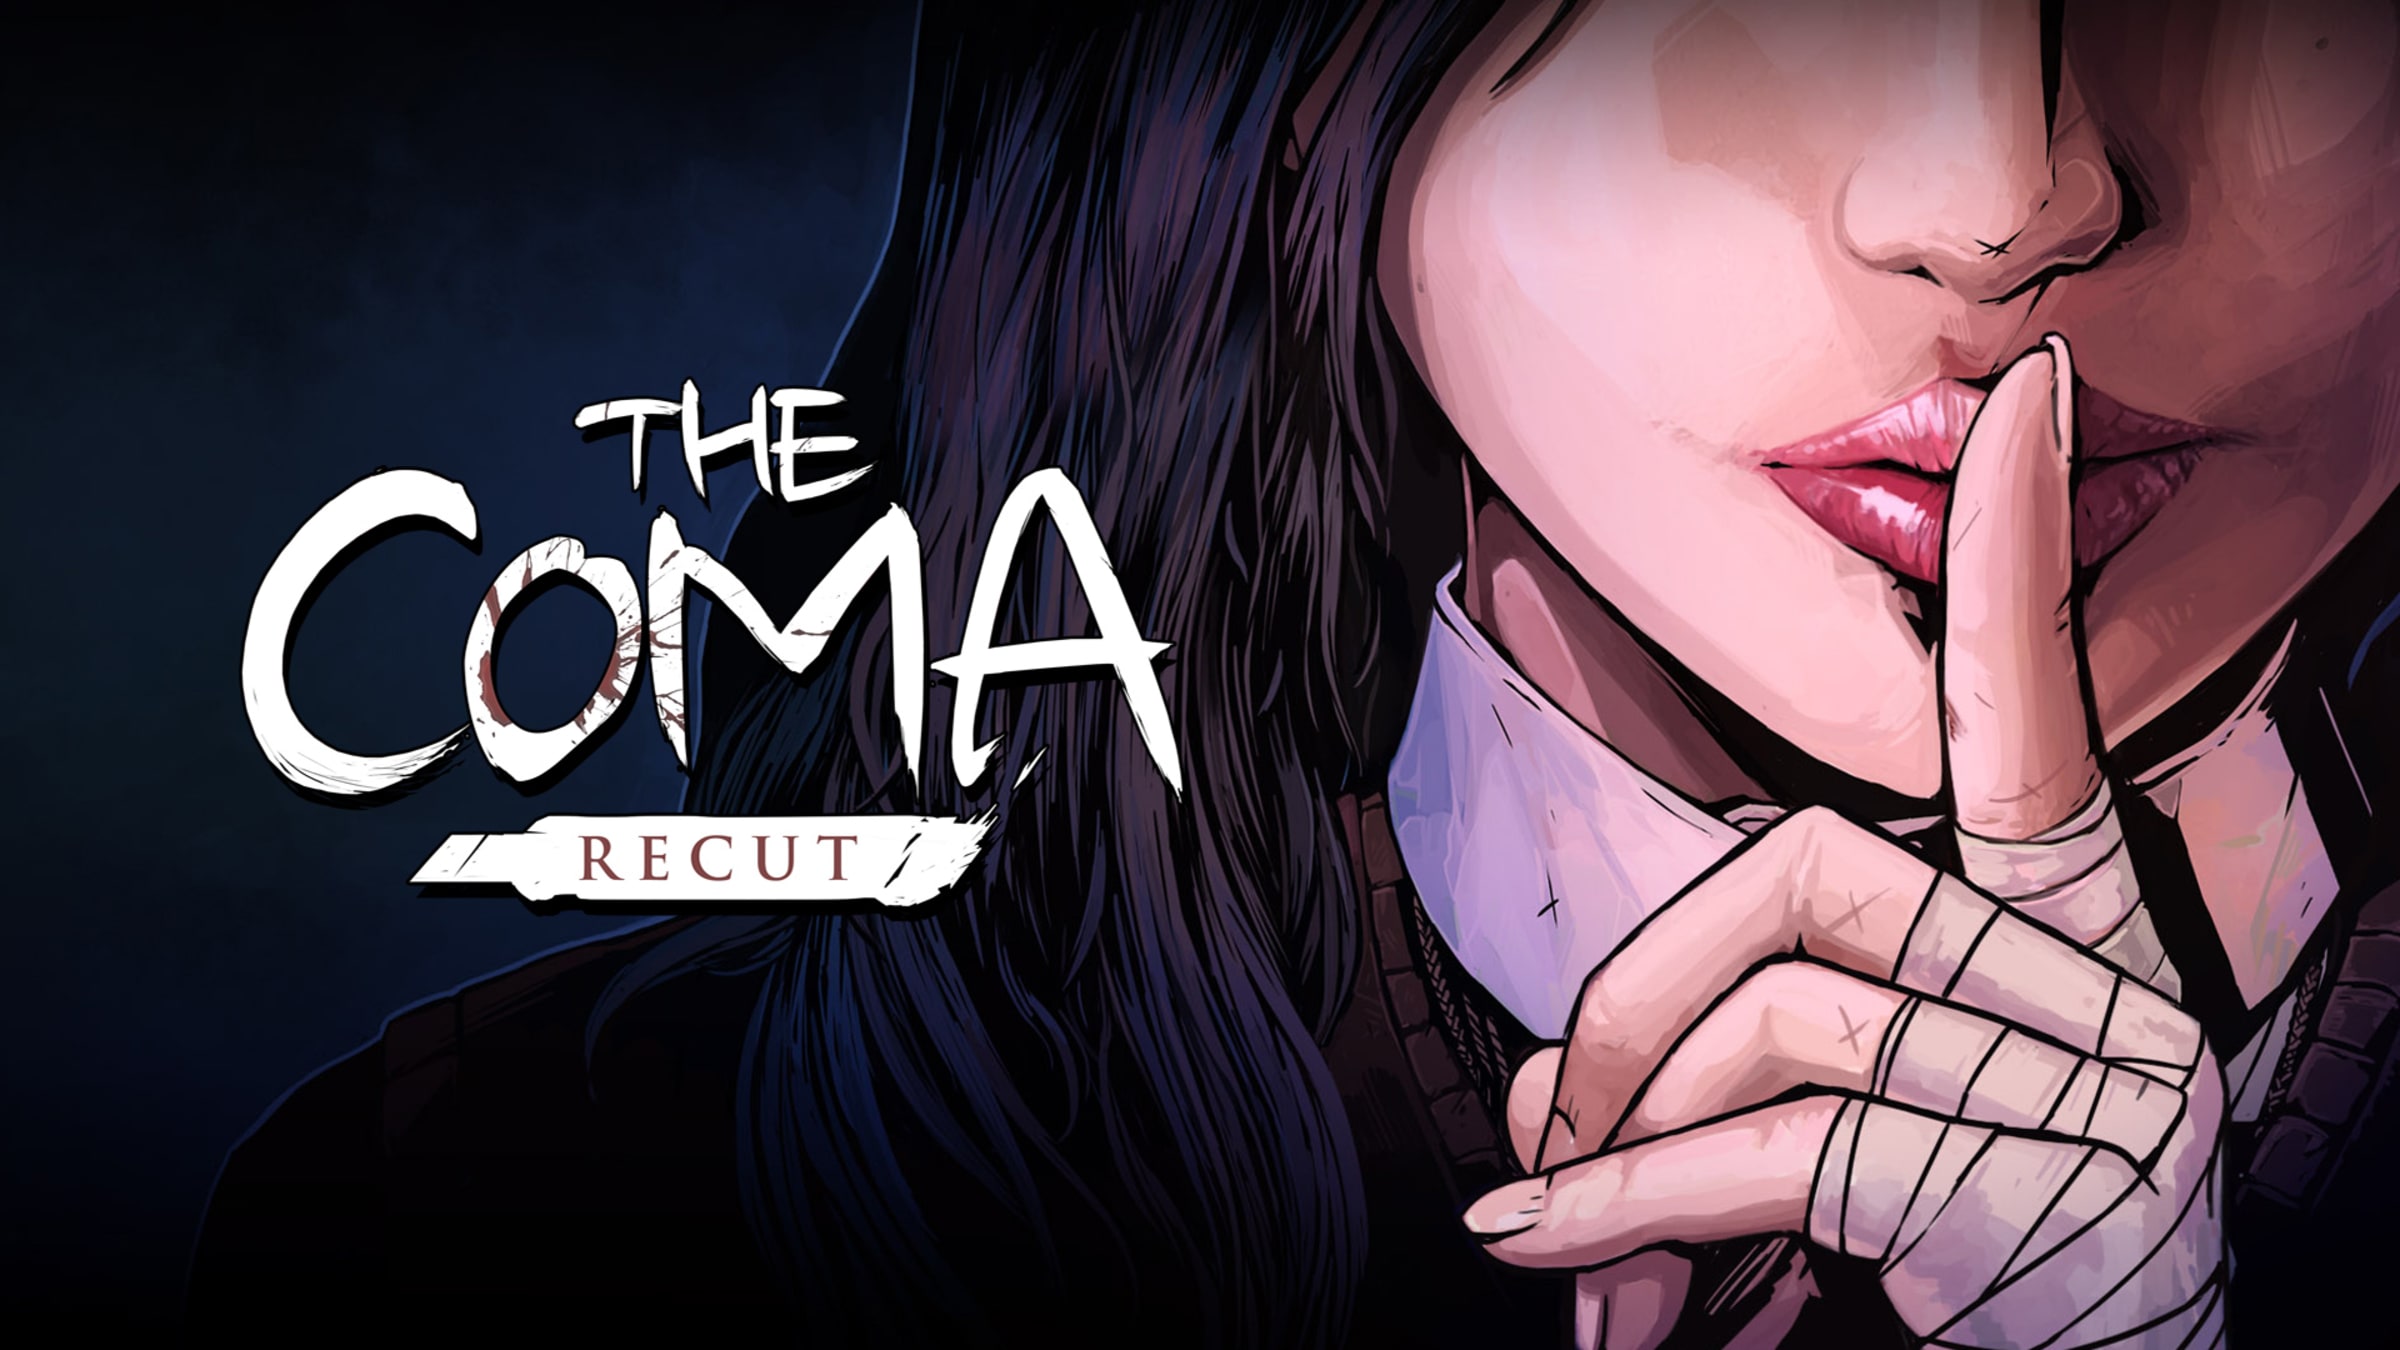 The Coma: Recut (PC Digital Download) Standard Edition $1.49, Deluxe Edition $2.40